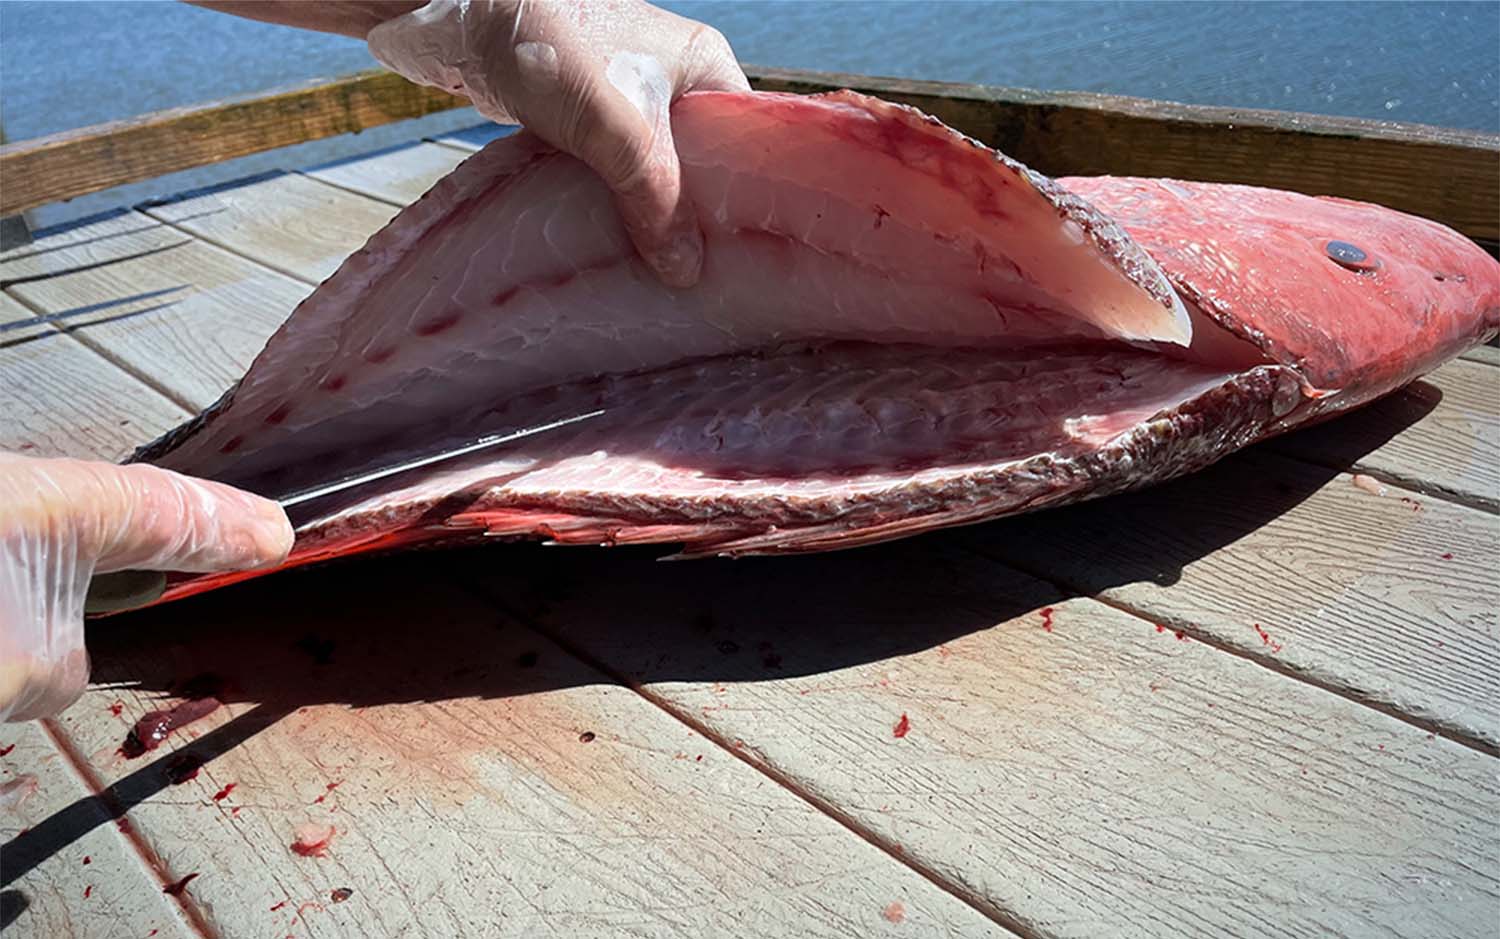 A hand cutting open a saltwater fish with a filet knife